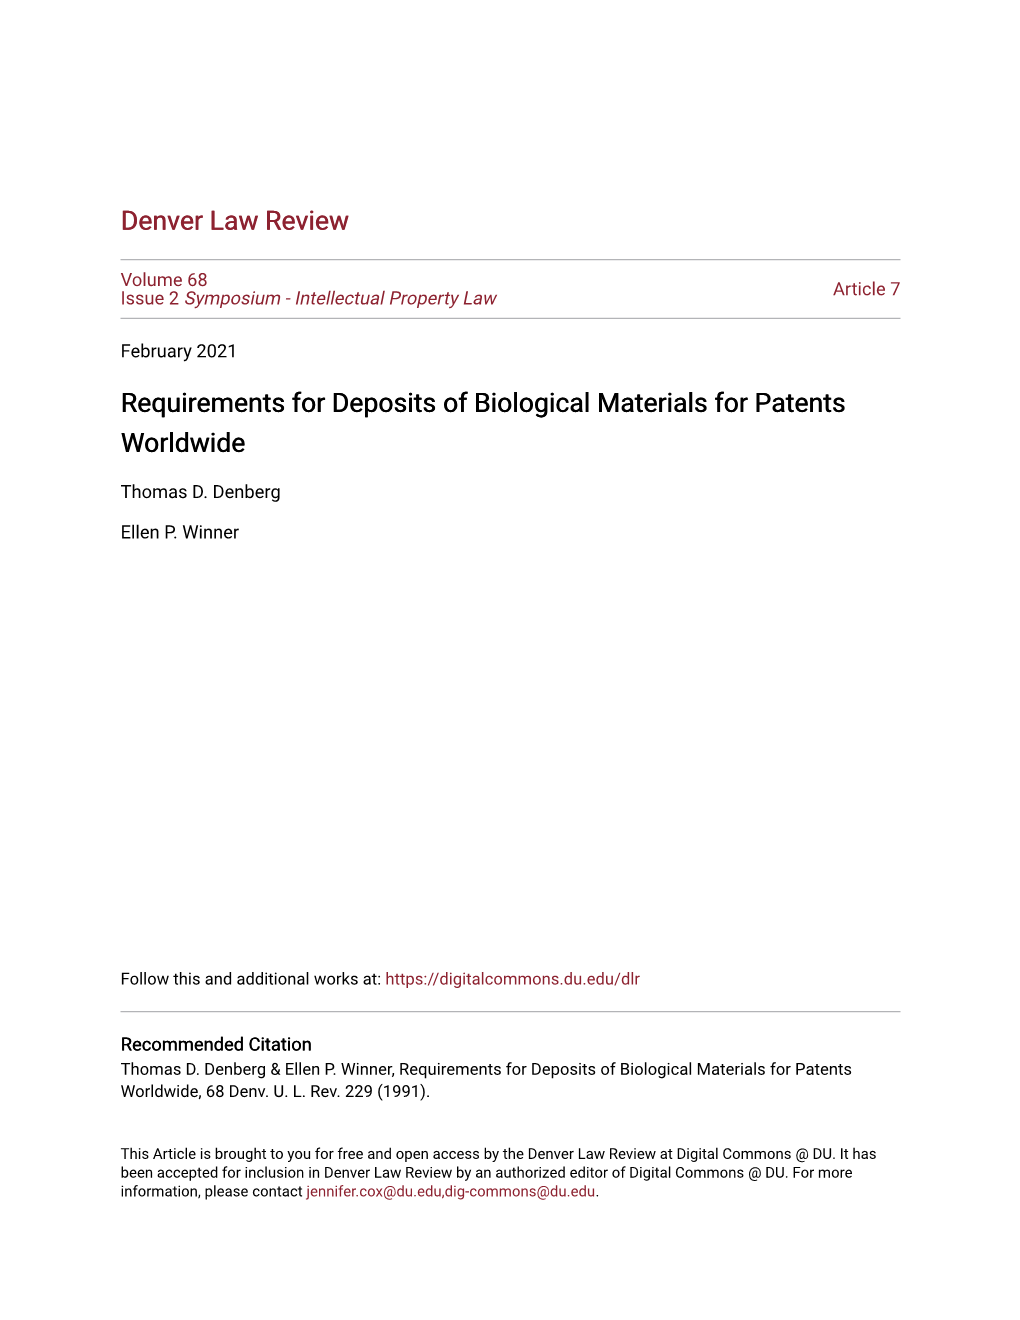 Requirements for Deposits of Biological Materials for Patents Worldwide